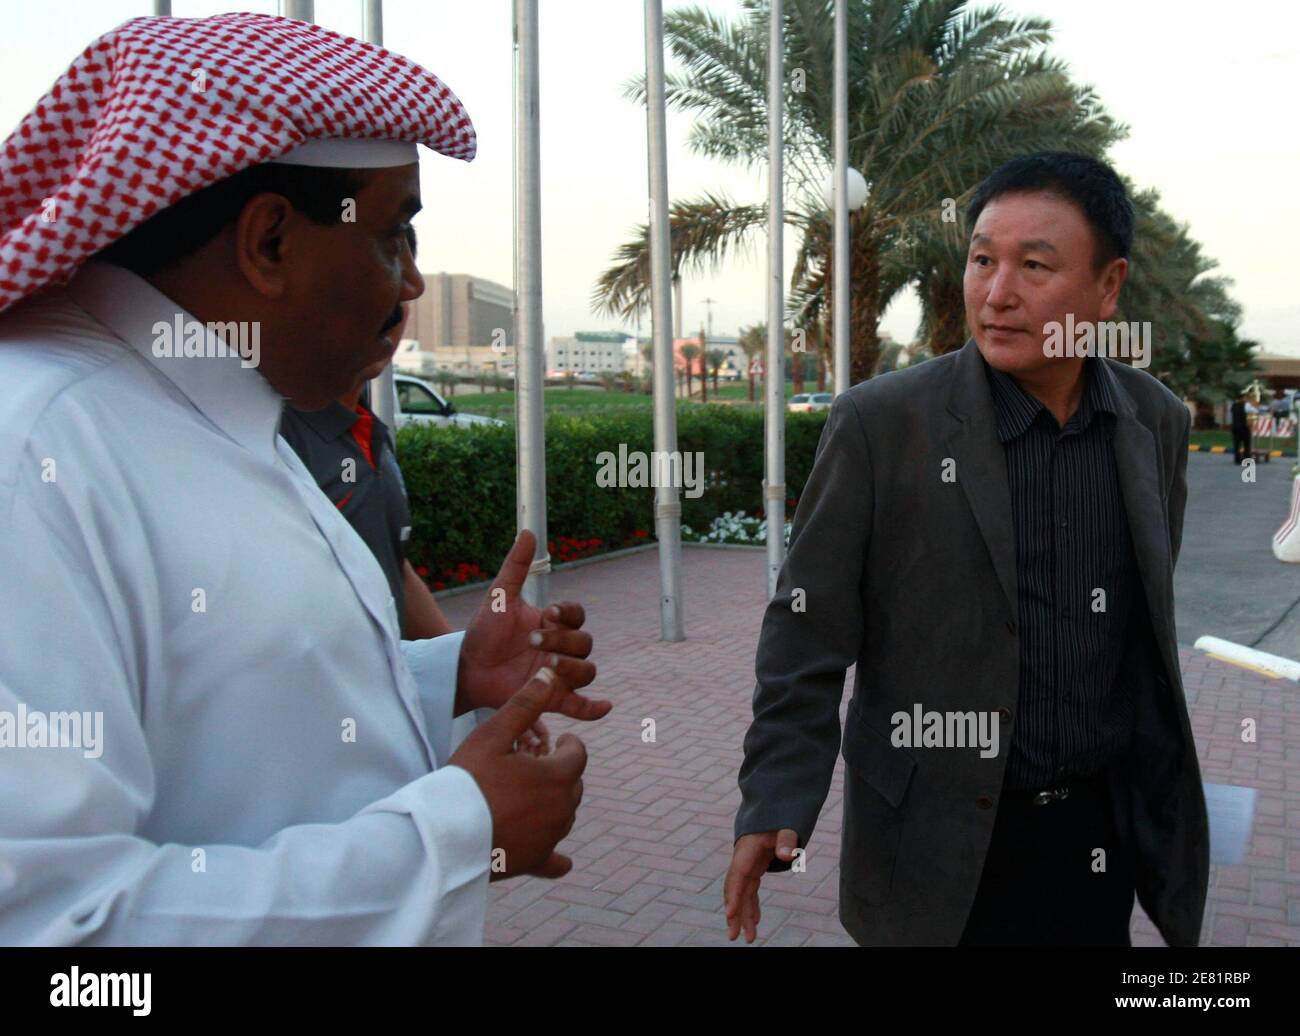 South Korea's national soccer team coach Huh Jung-moo (R) is greeted by a hotel attendant as he arrives in Riyadh November 17, 2008. South Korea will play their World Cup 2010 qualifying soccer match against Saudi Arabia on November 19.    REUTERS/Fahad Shadeed   (SAUDI ARABIA) Stock Photo